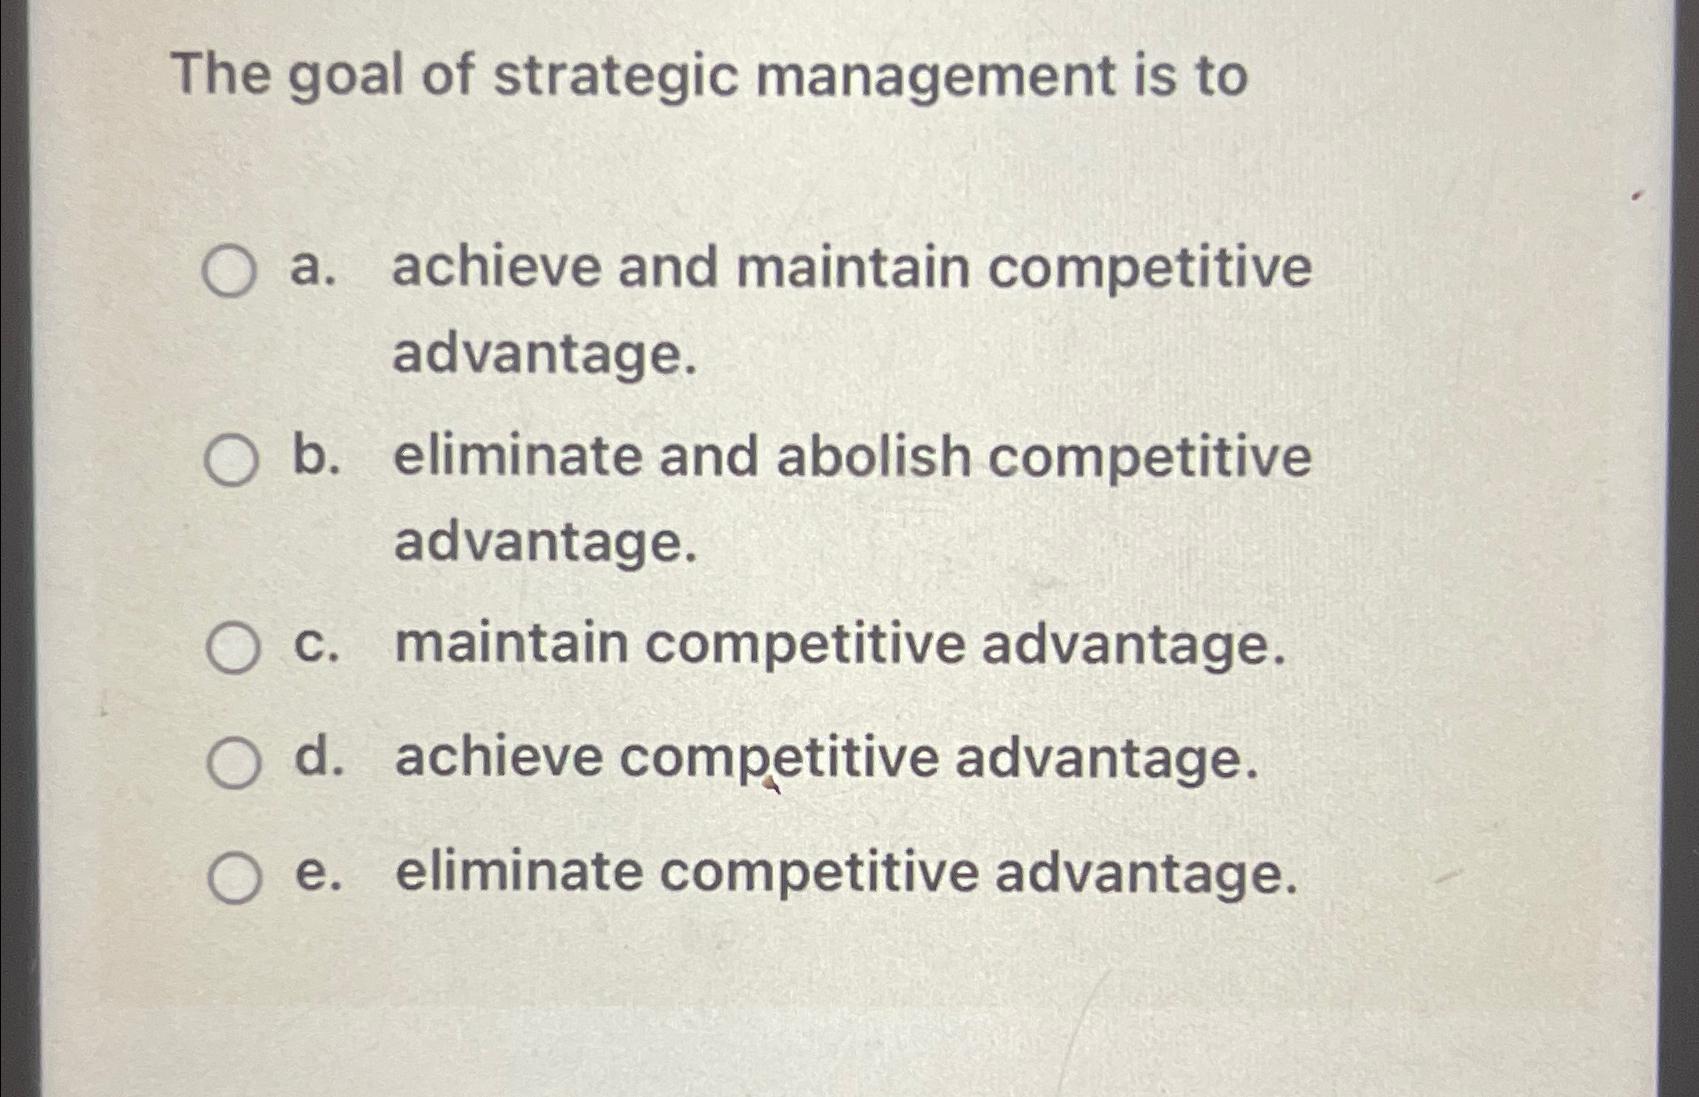 The goal of strategic management is to a. achieve and maintain competitive advantage. O b. eliminate and